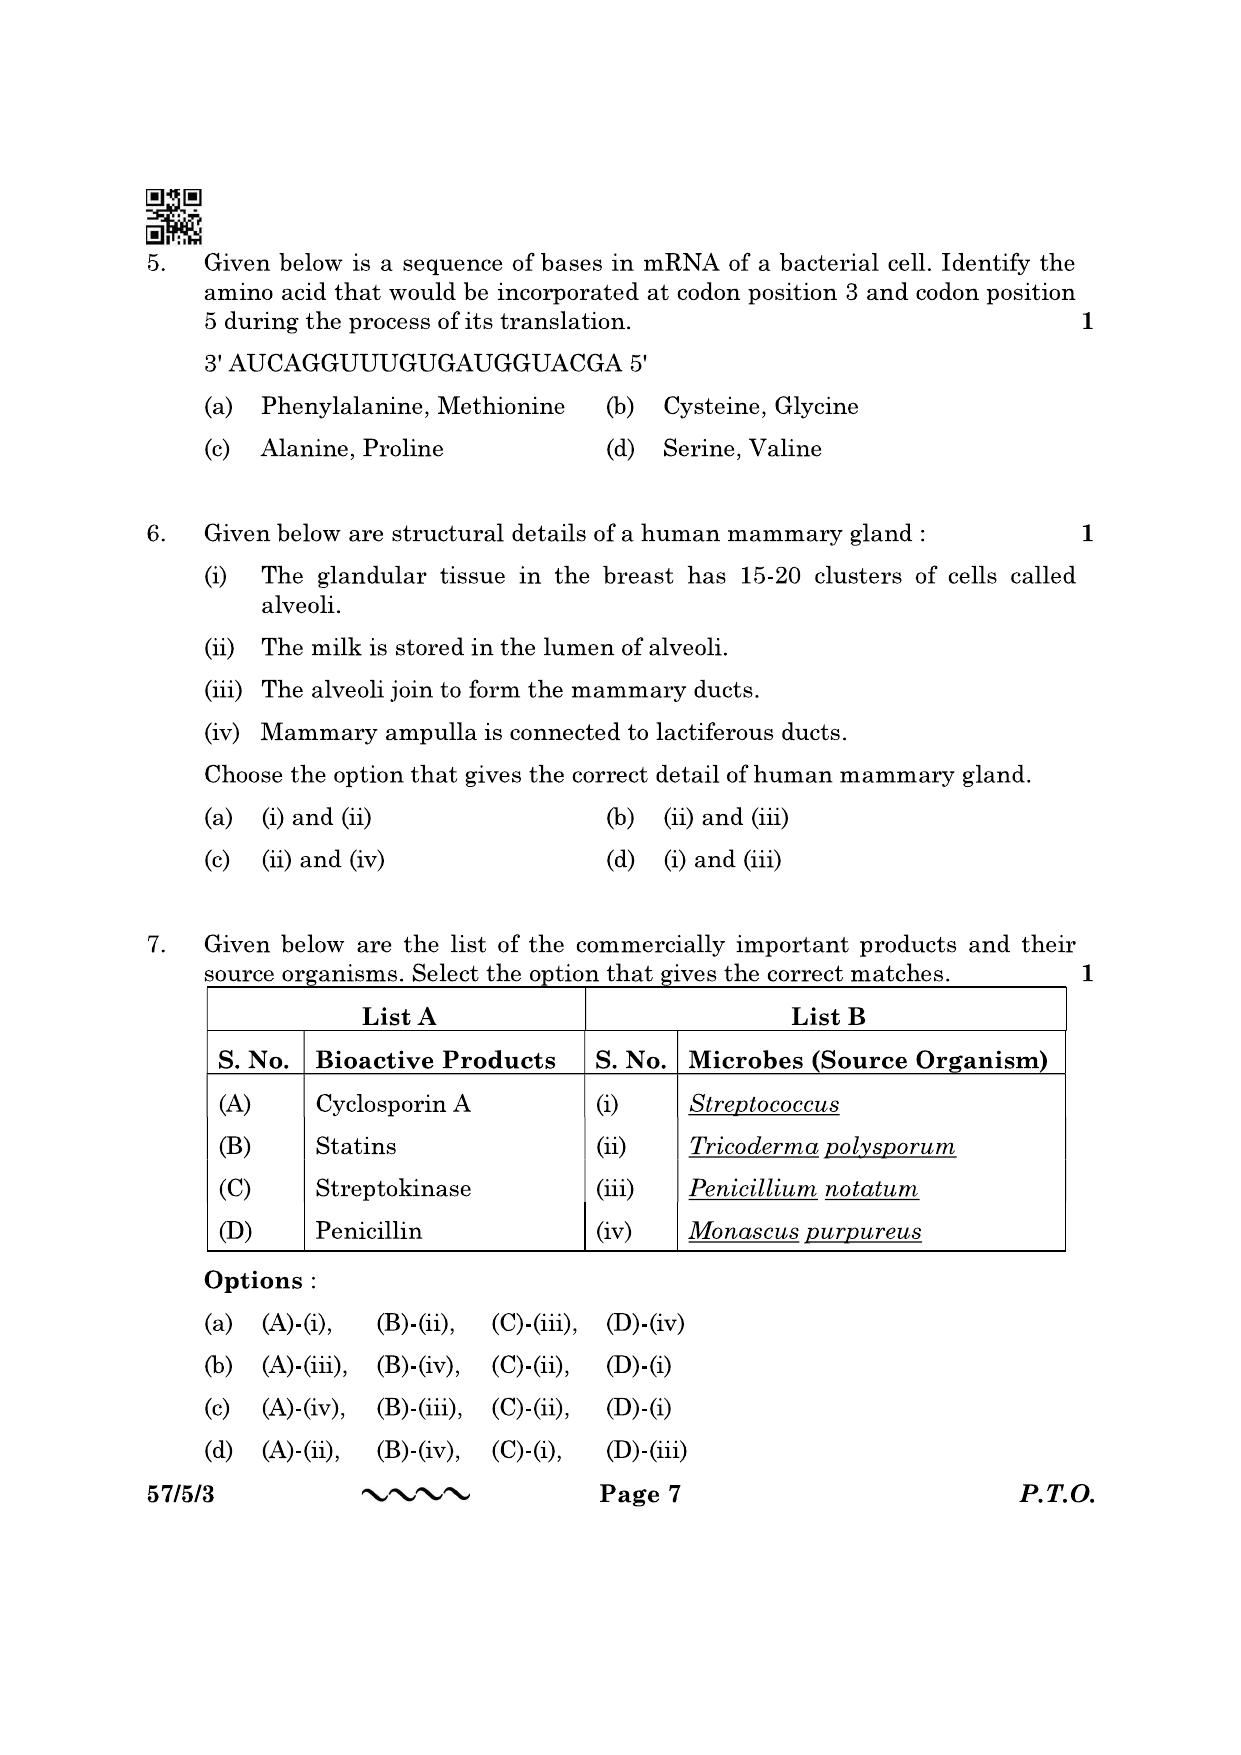 CBSE Class 12 57-5-3 Biology 2023 Question Paper - Page 7